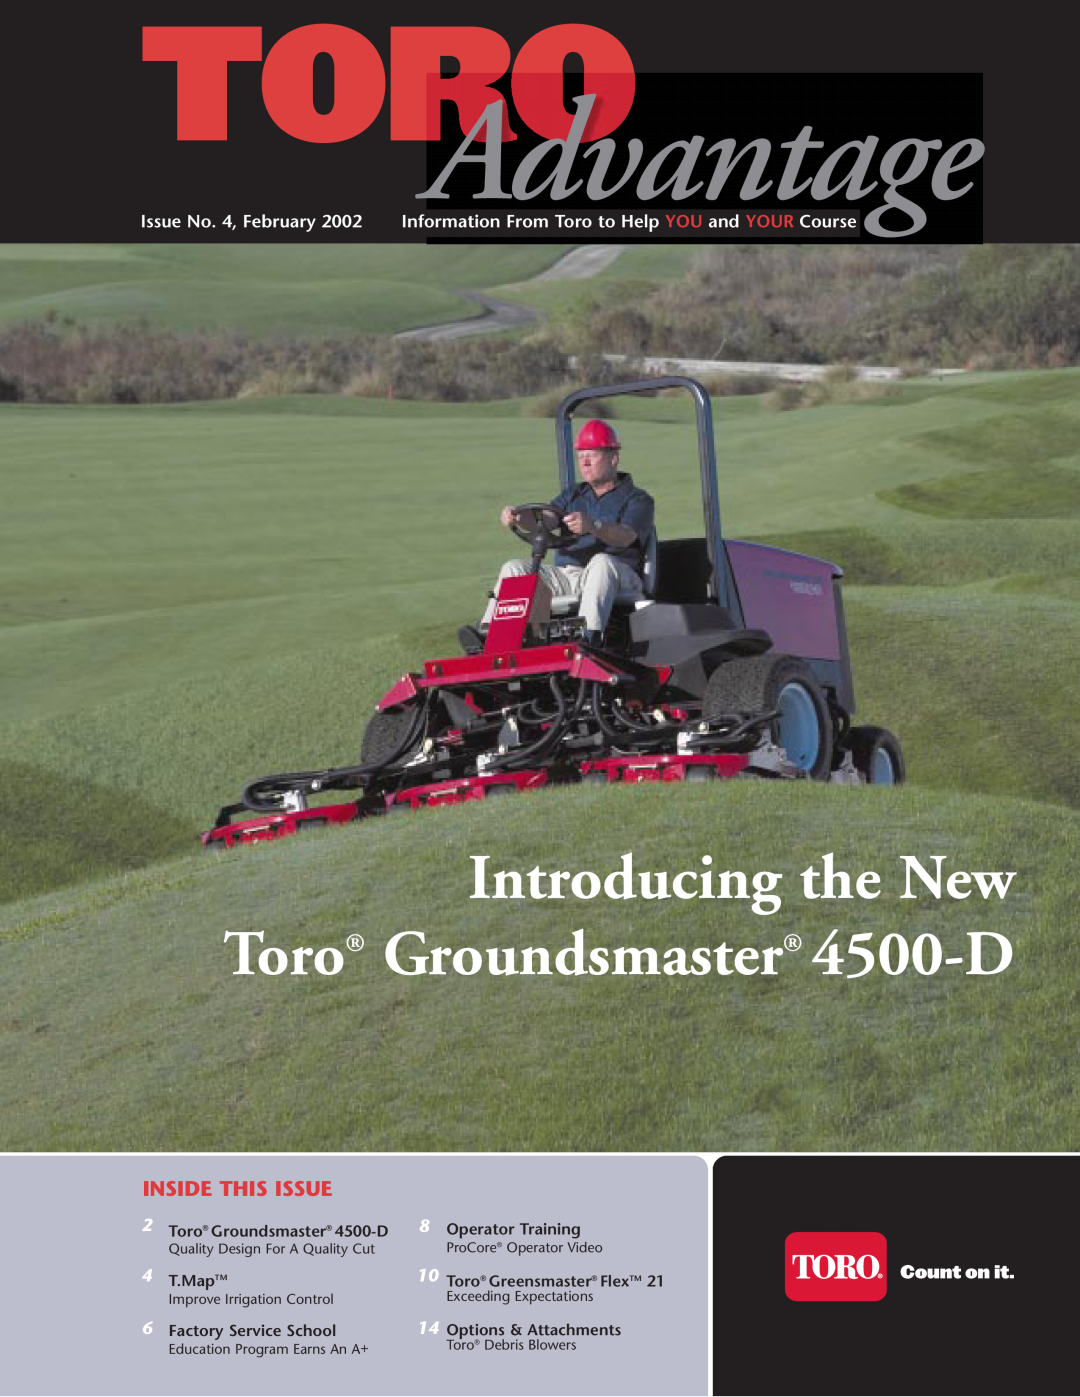 Toro manual Inside This Issue, Introducing the New Toro Groundsmaster 4500-D, Operator Training, T.MapTM 